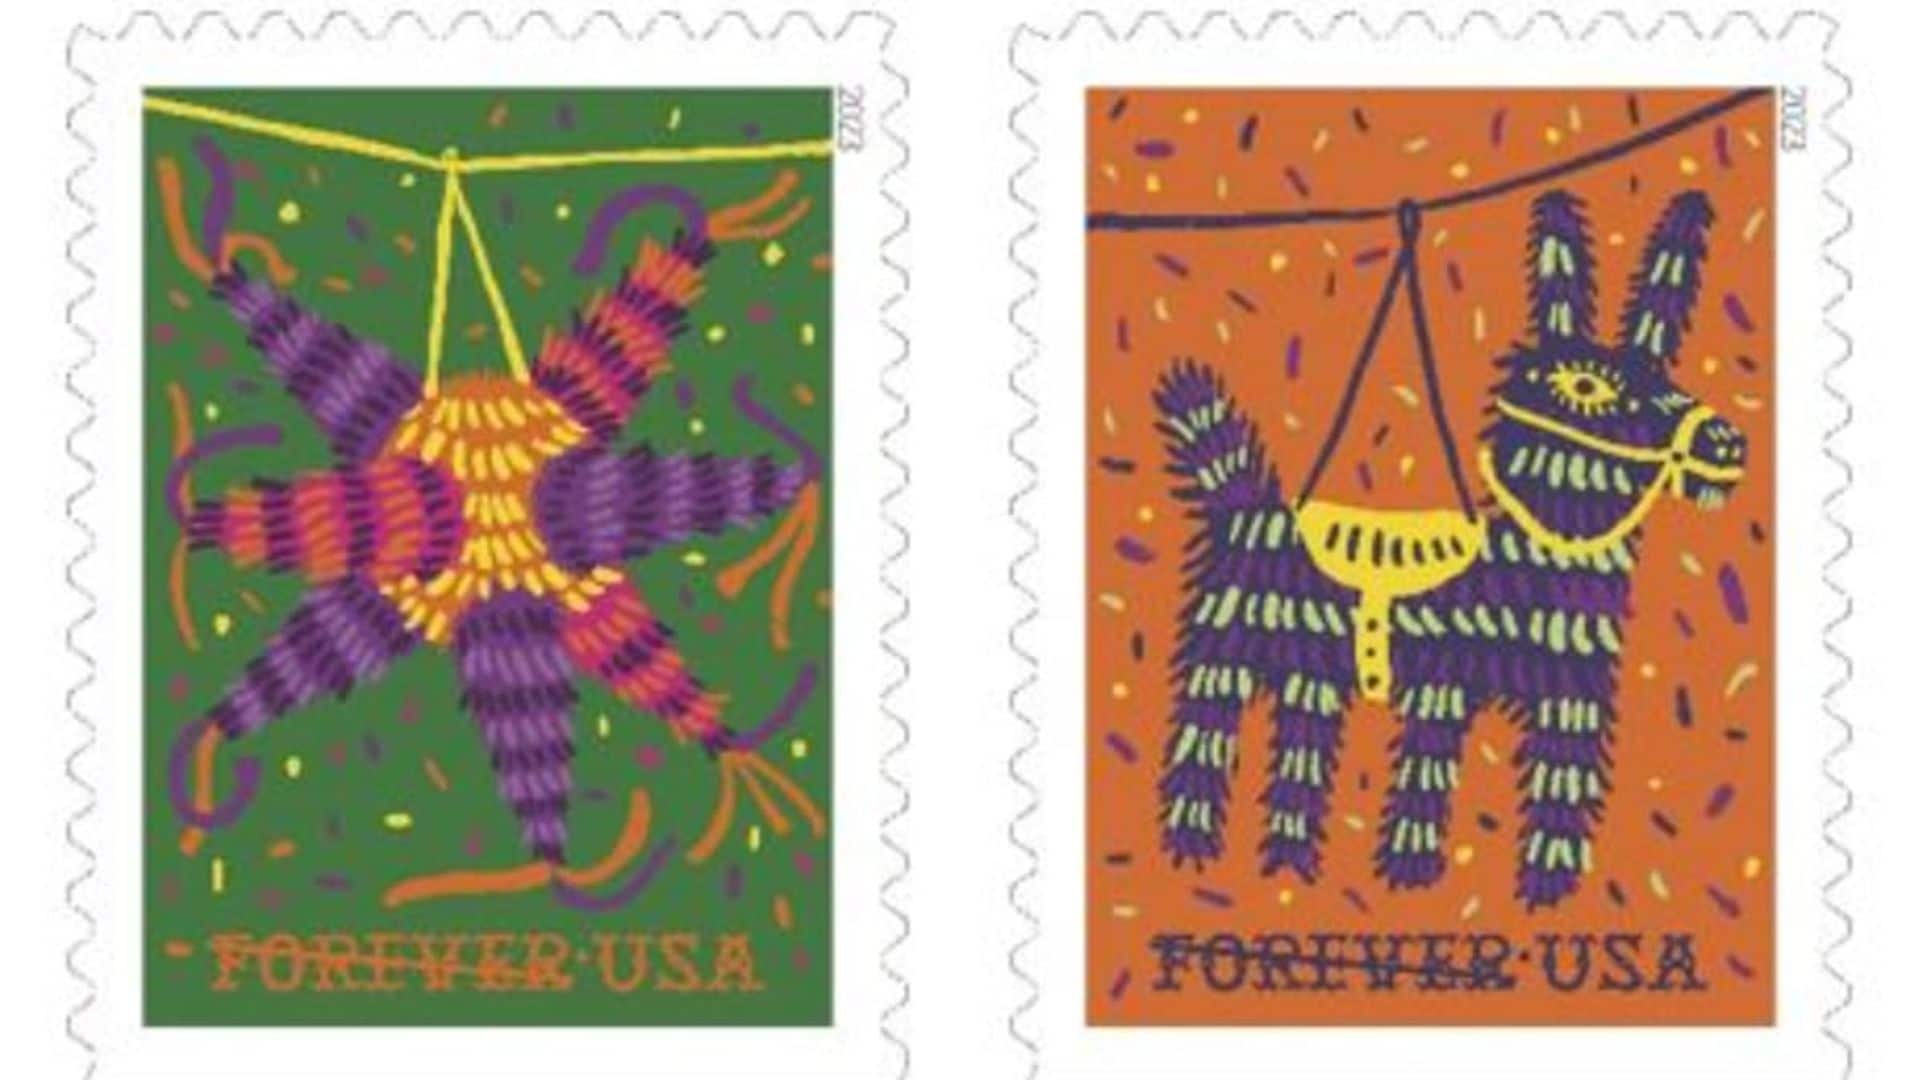 The U.S. Postal Service honors Hispanic Heritage Month with Piñata stamps